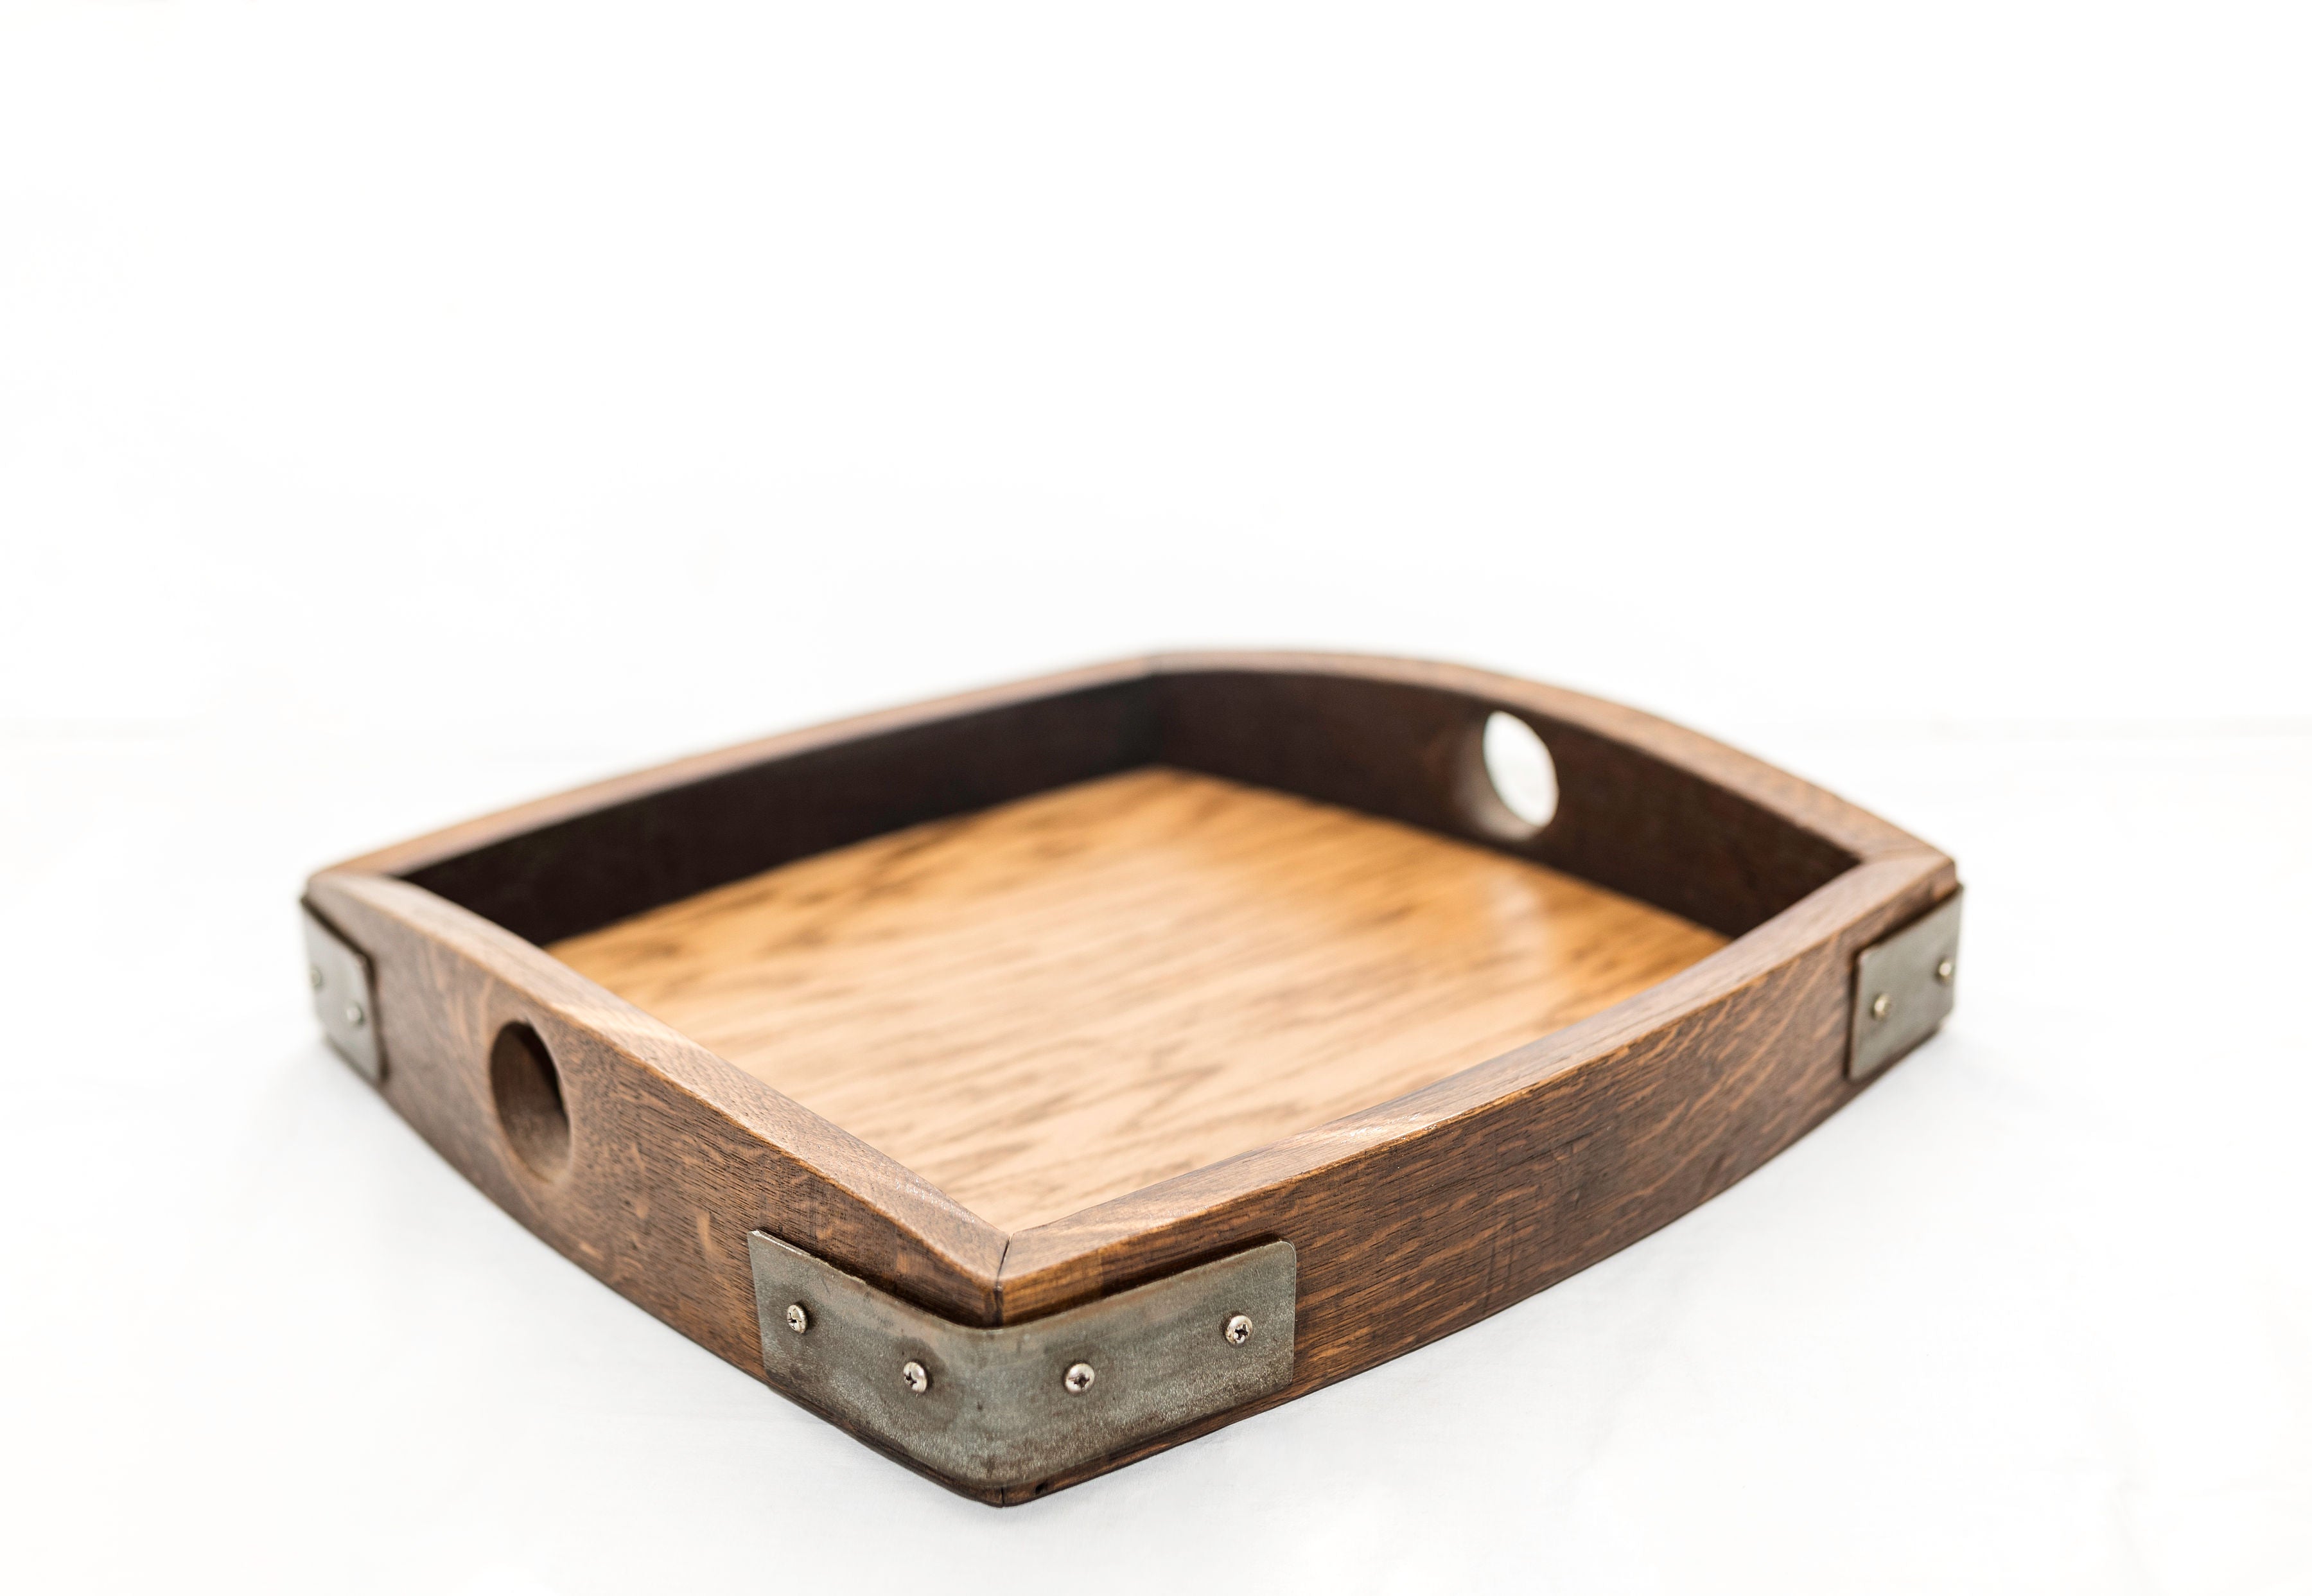 2 Piece Rectangular Serving Tray Set made from Reclaimed Wine Barrels